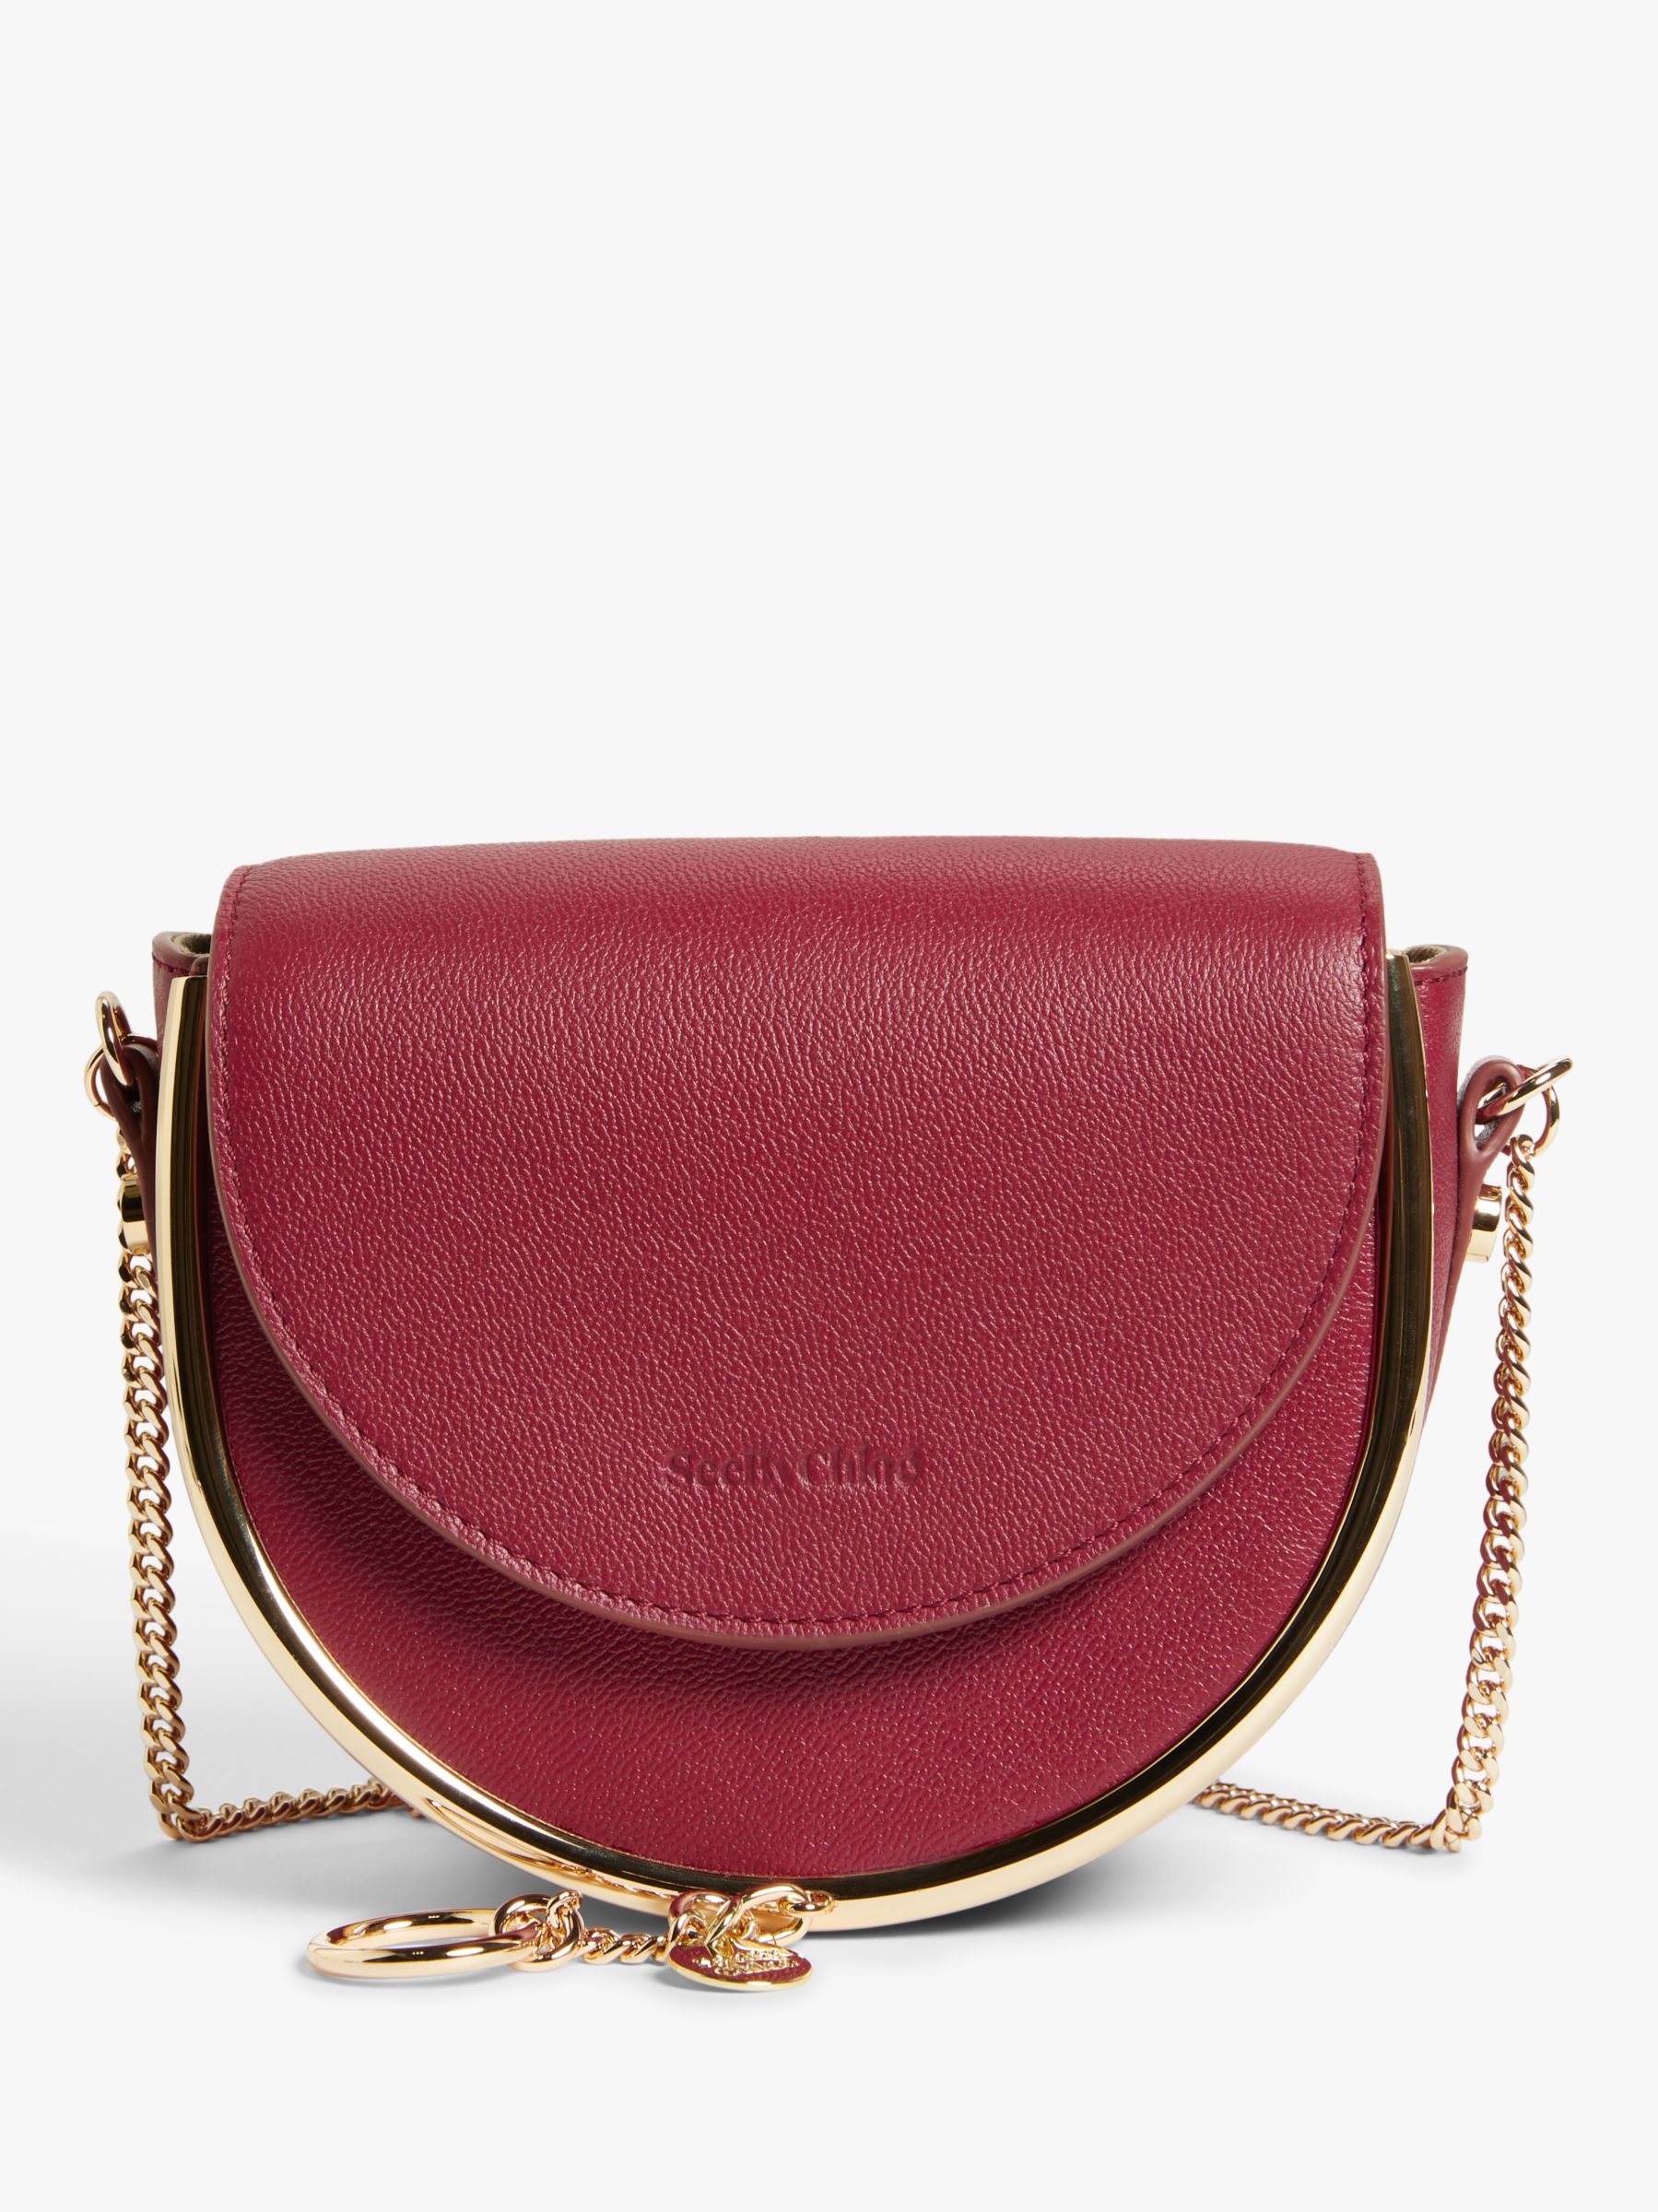 See By Chloé Mara Mini Chain Leather Cross Body Bag, Smoked Red at John ...